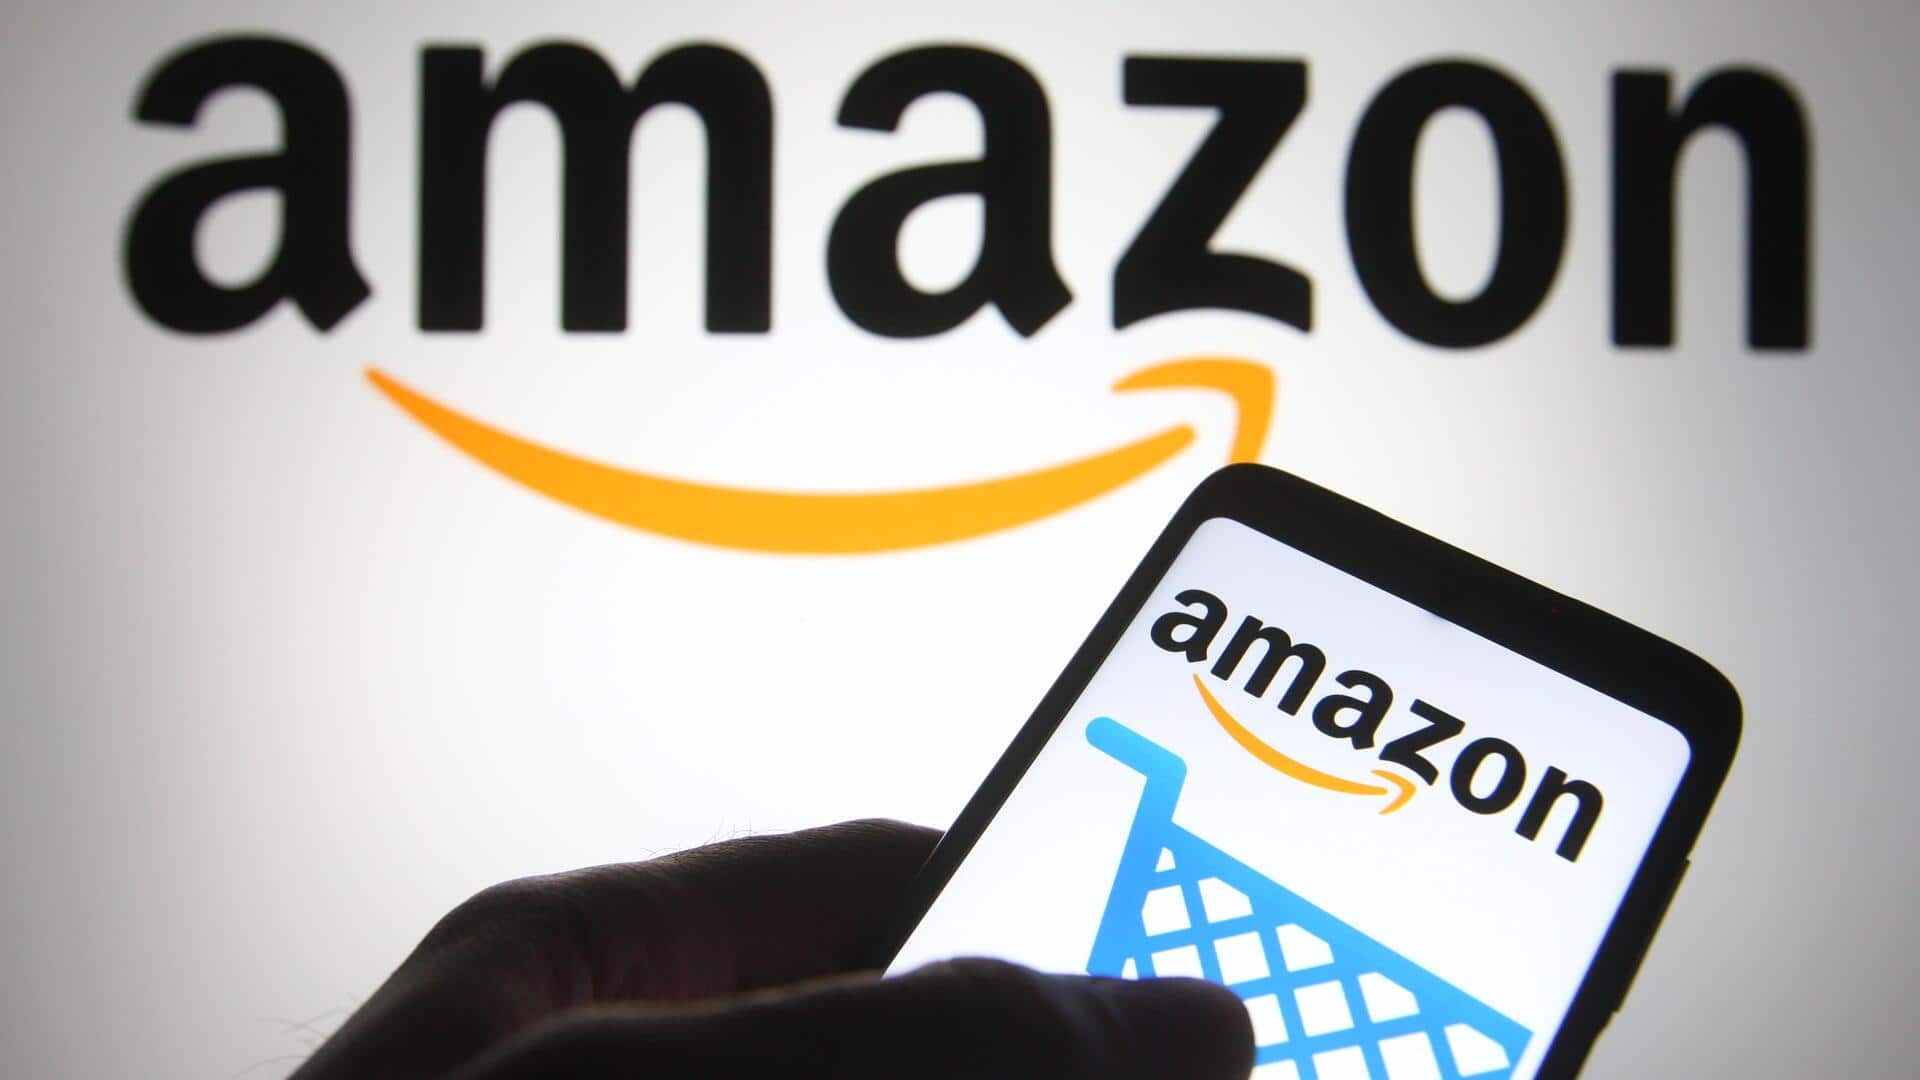 You can now purchase products from Amazon within Snapchat